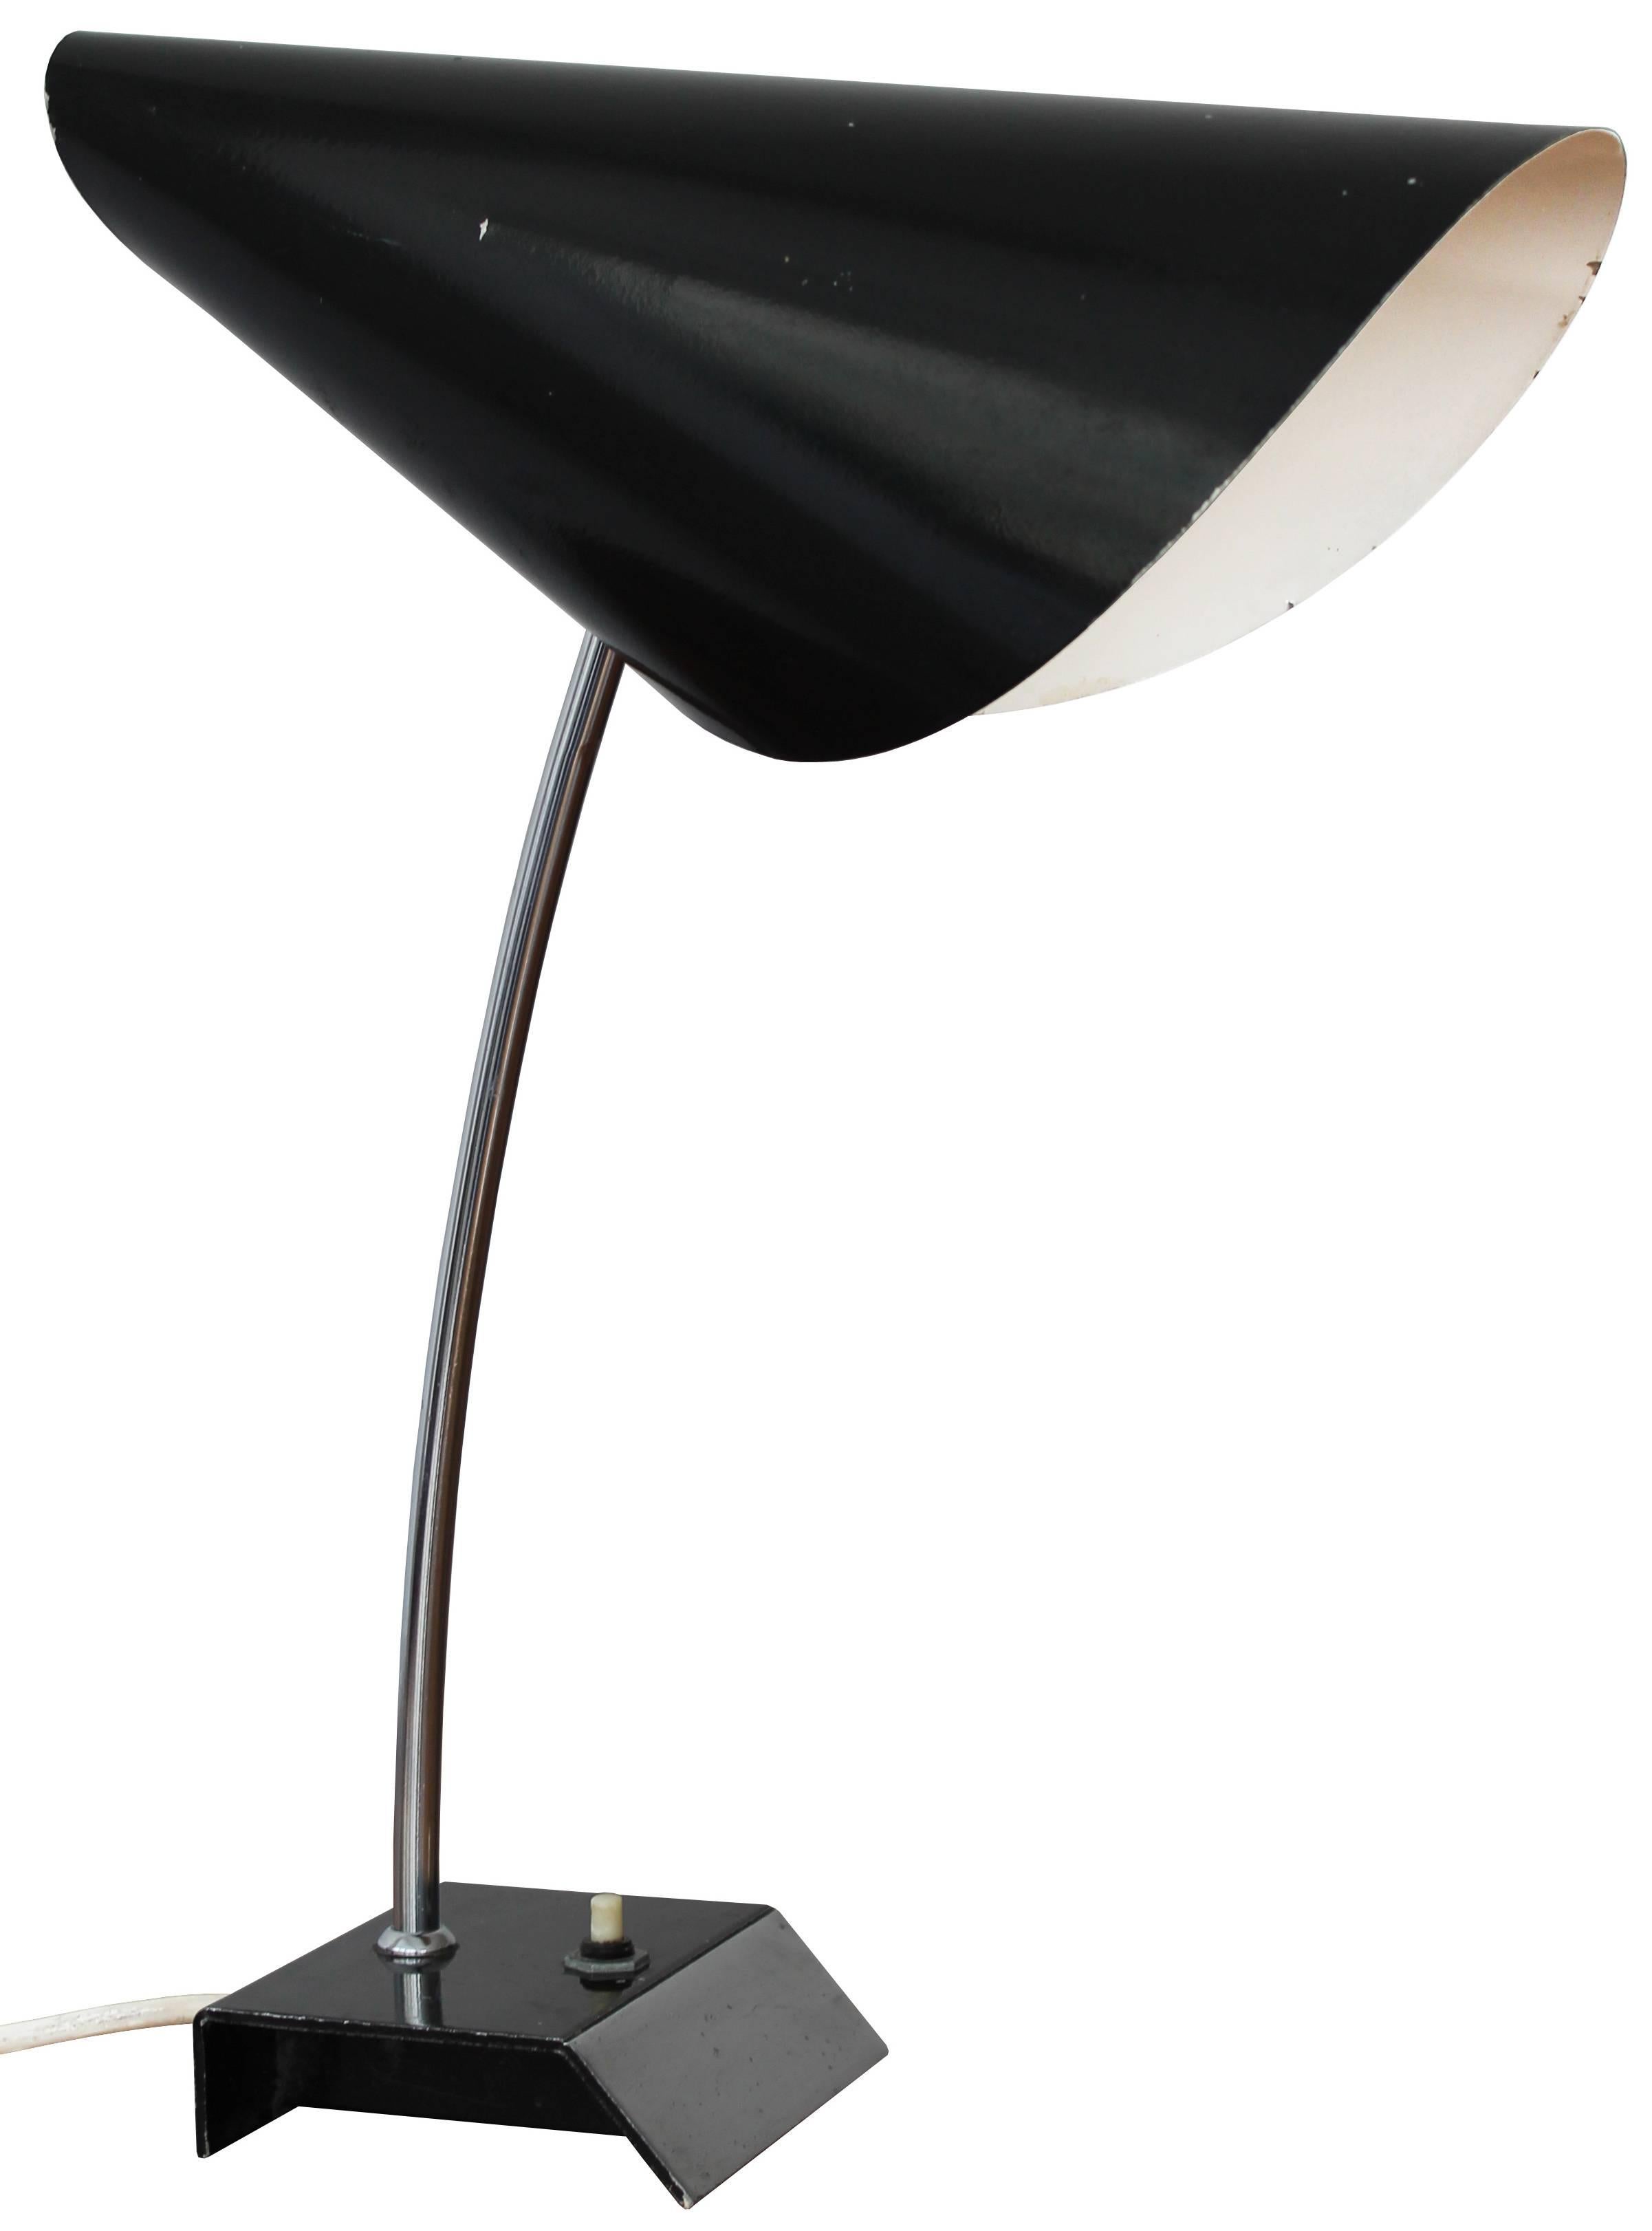 This is one of the true icons of the 20th century Czech design, the table lamp 0513 by famous lighting designer Josef Hurka. This lamp is often nicknamed the 